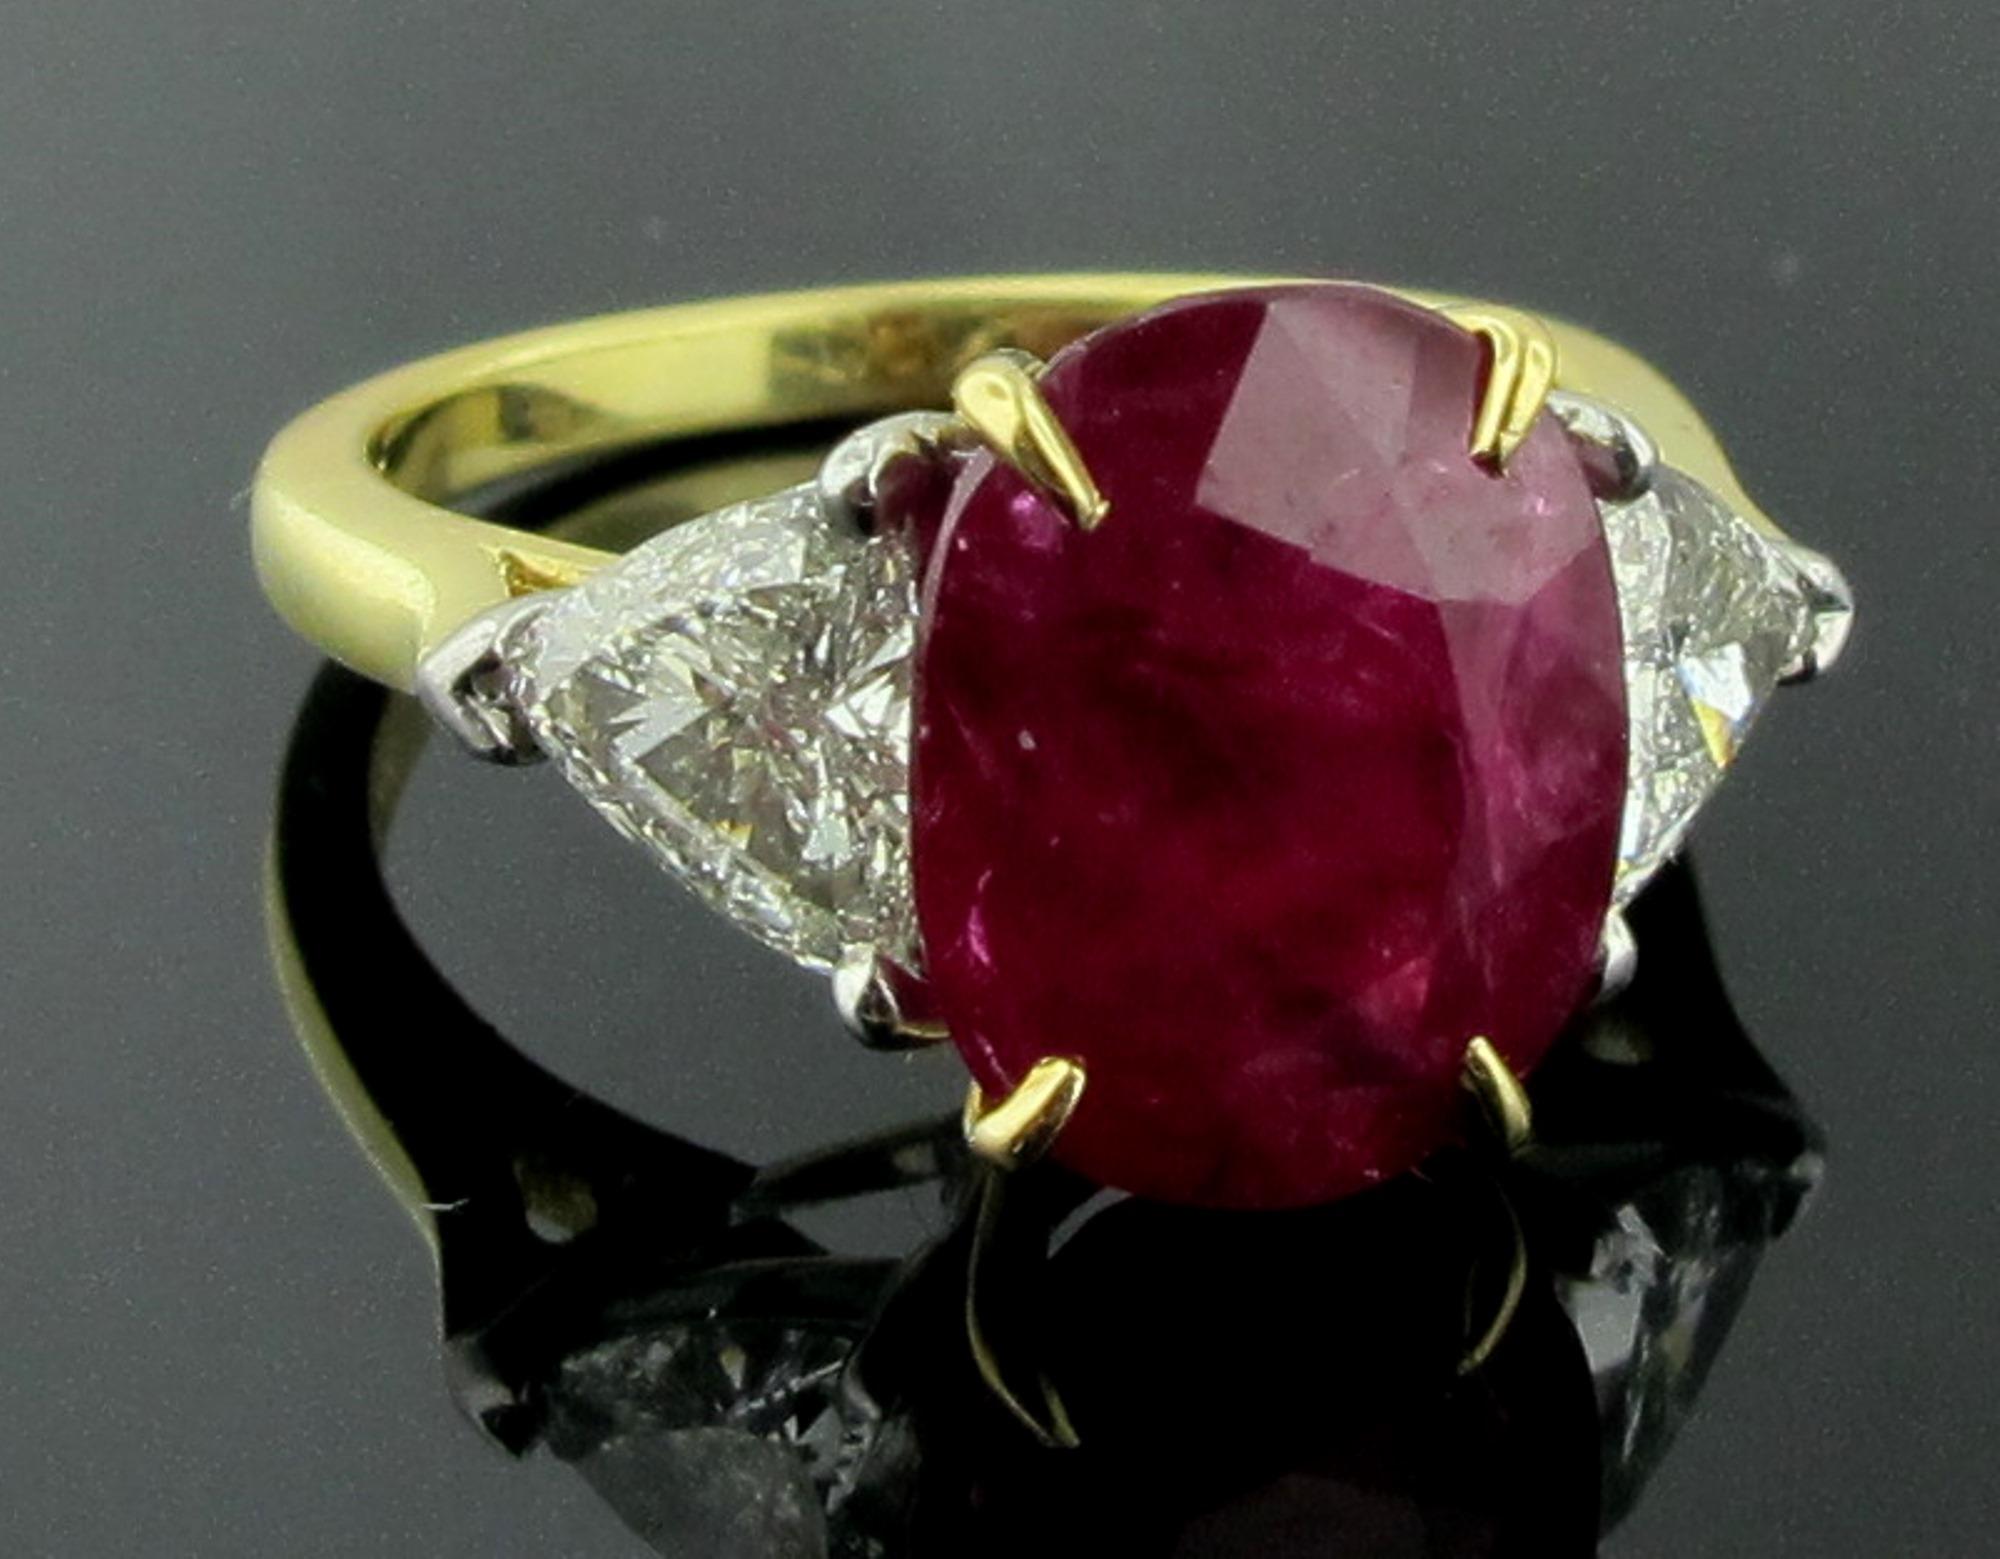 6.22 Carat Ruby and Diamond Ring in 18 Karat Yellow Gold and Platinum 1